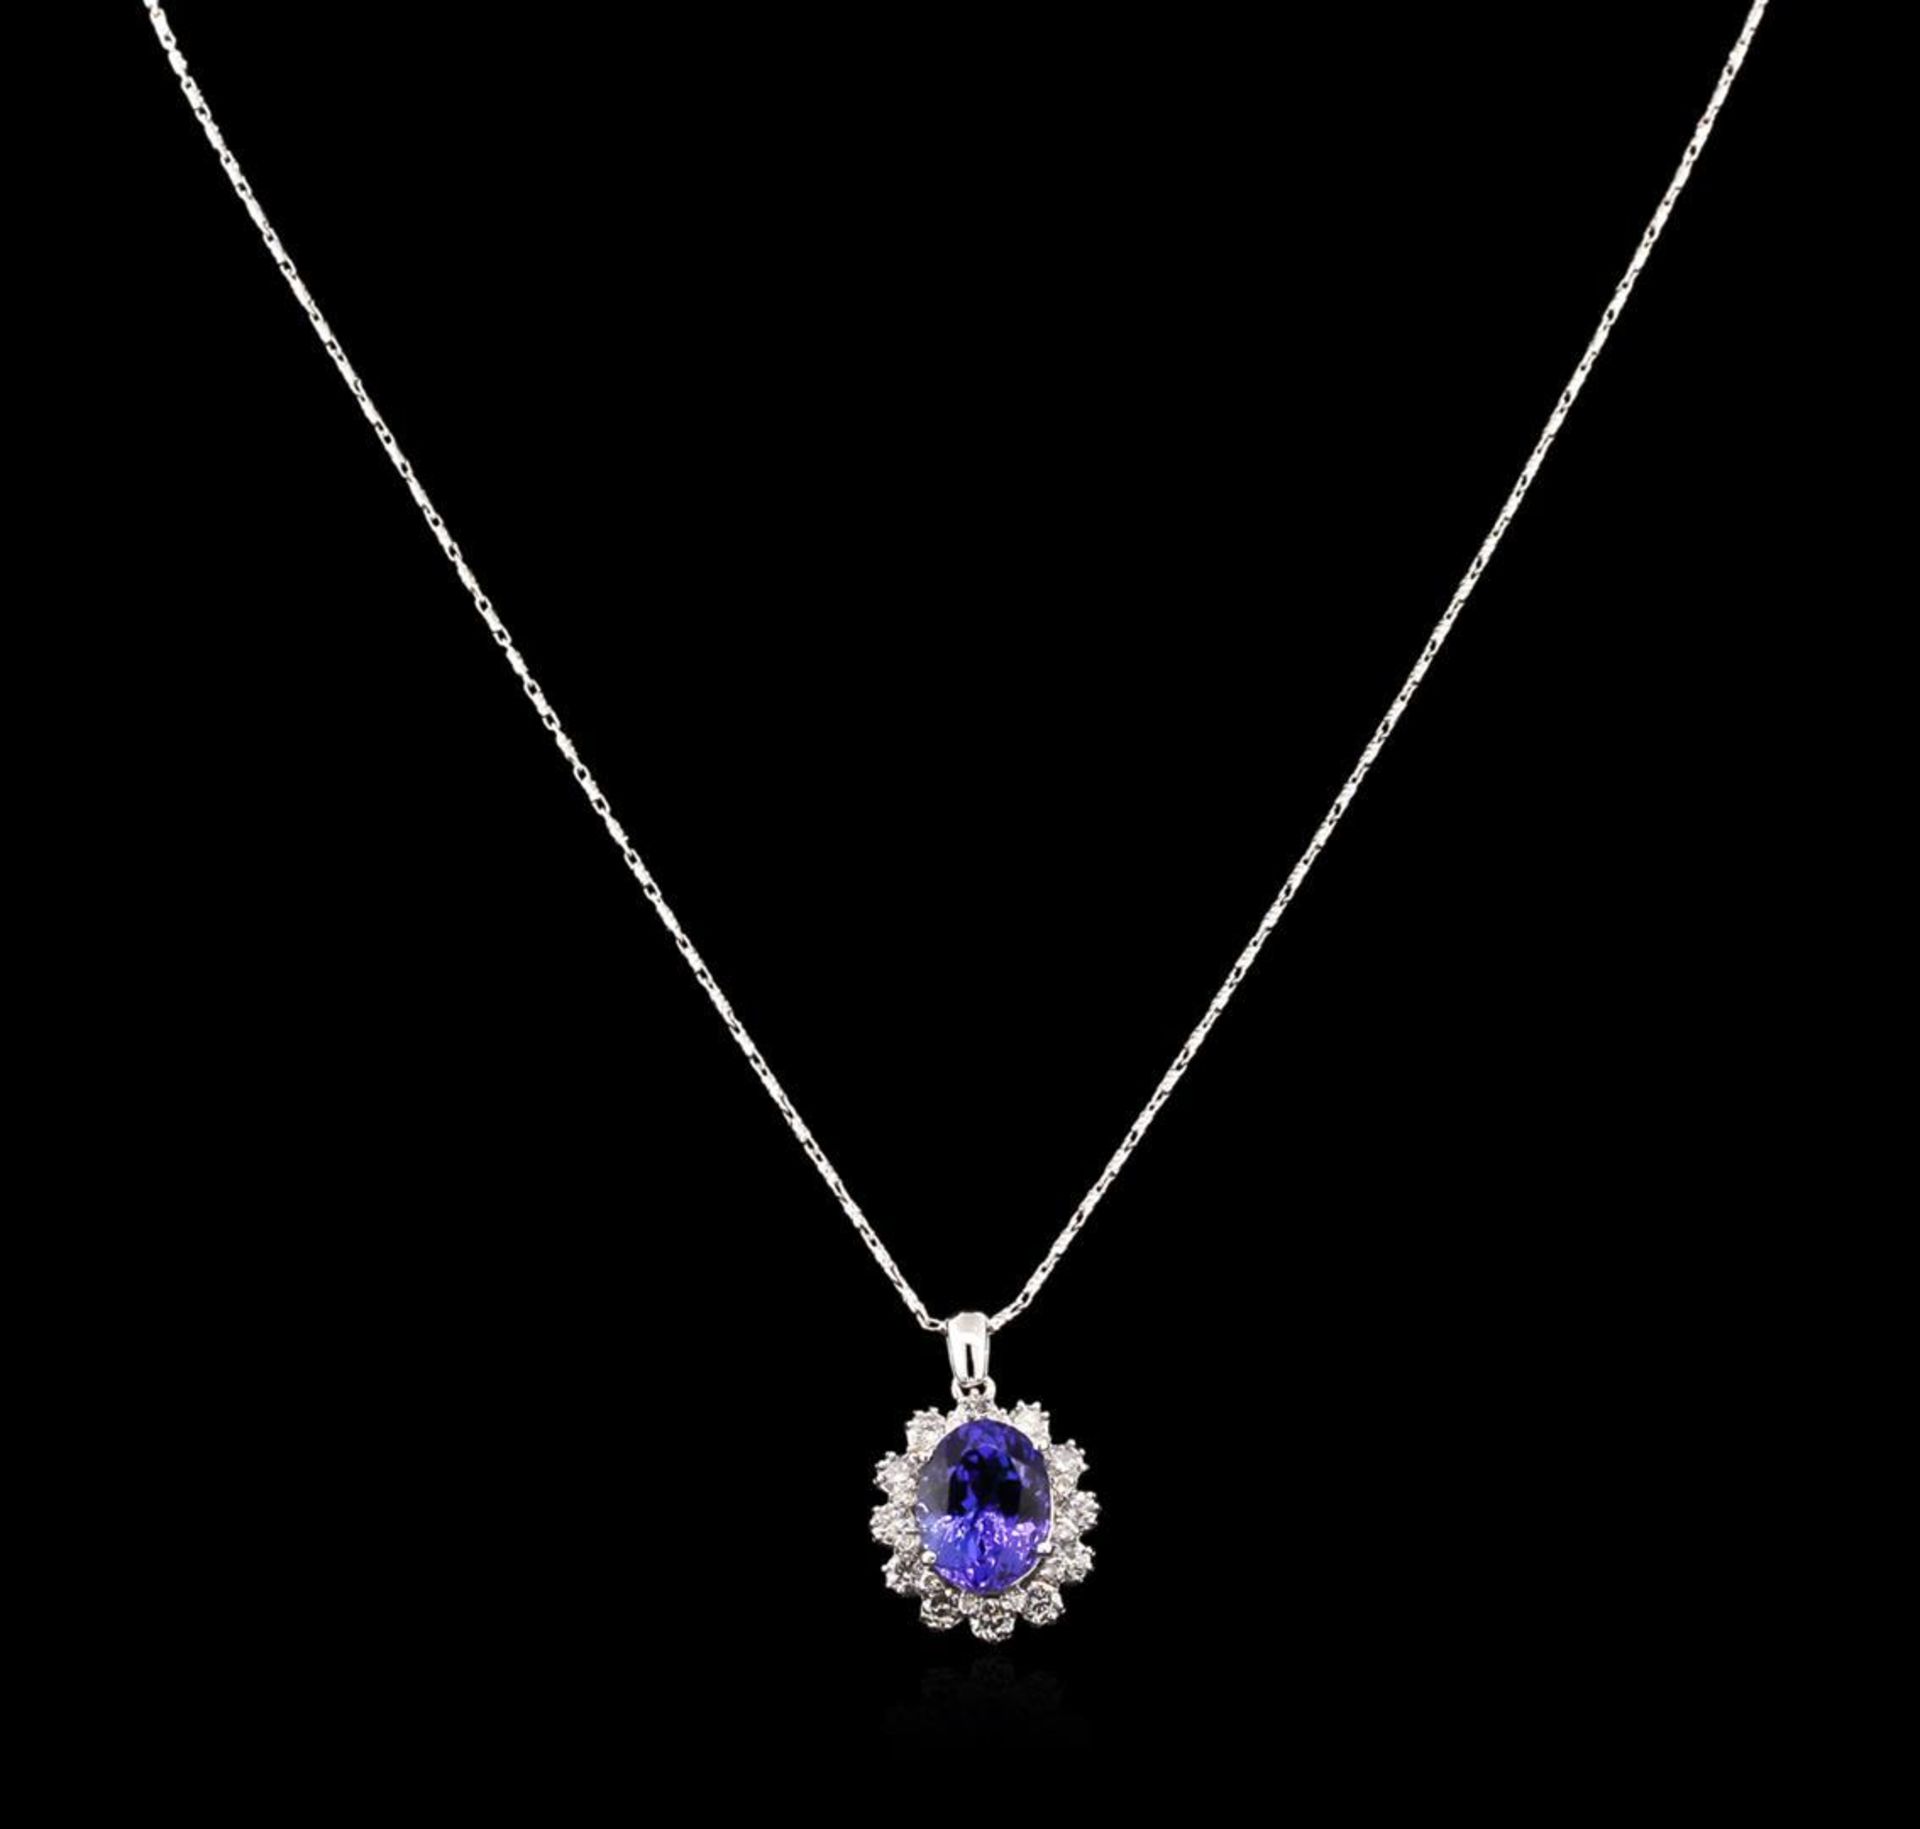 4.80 ctw Tanzanite and Diamond Pendant With Chain - 14KT White Gold - Image 2 of 3